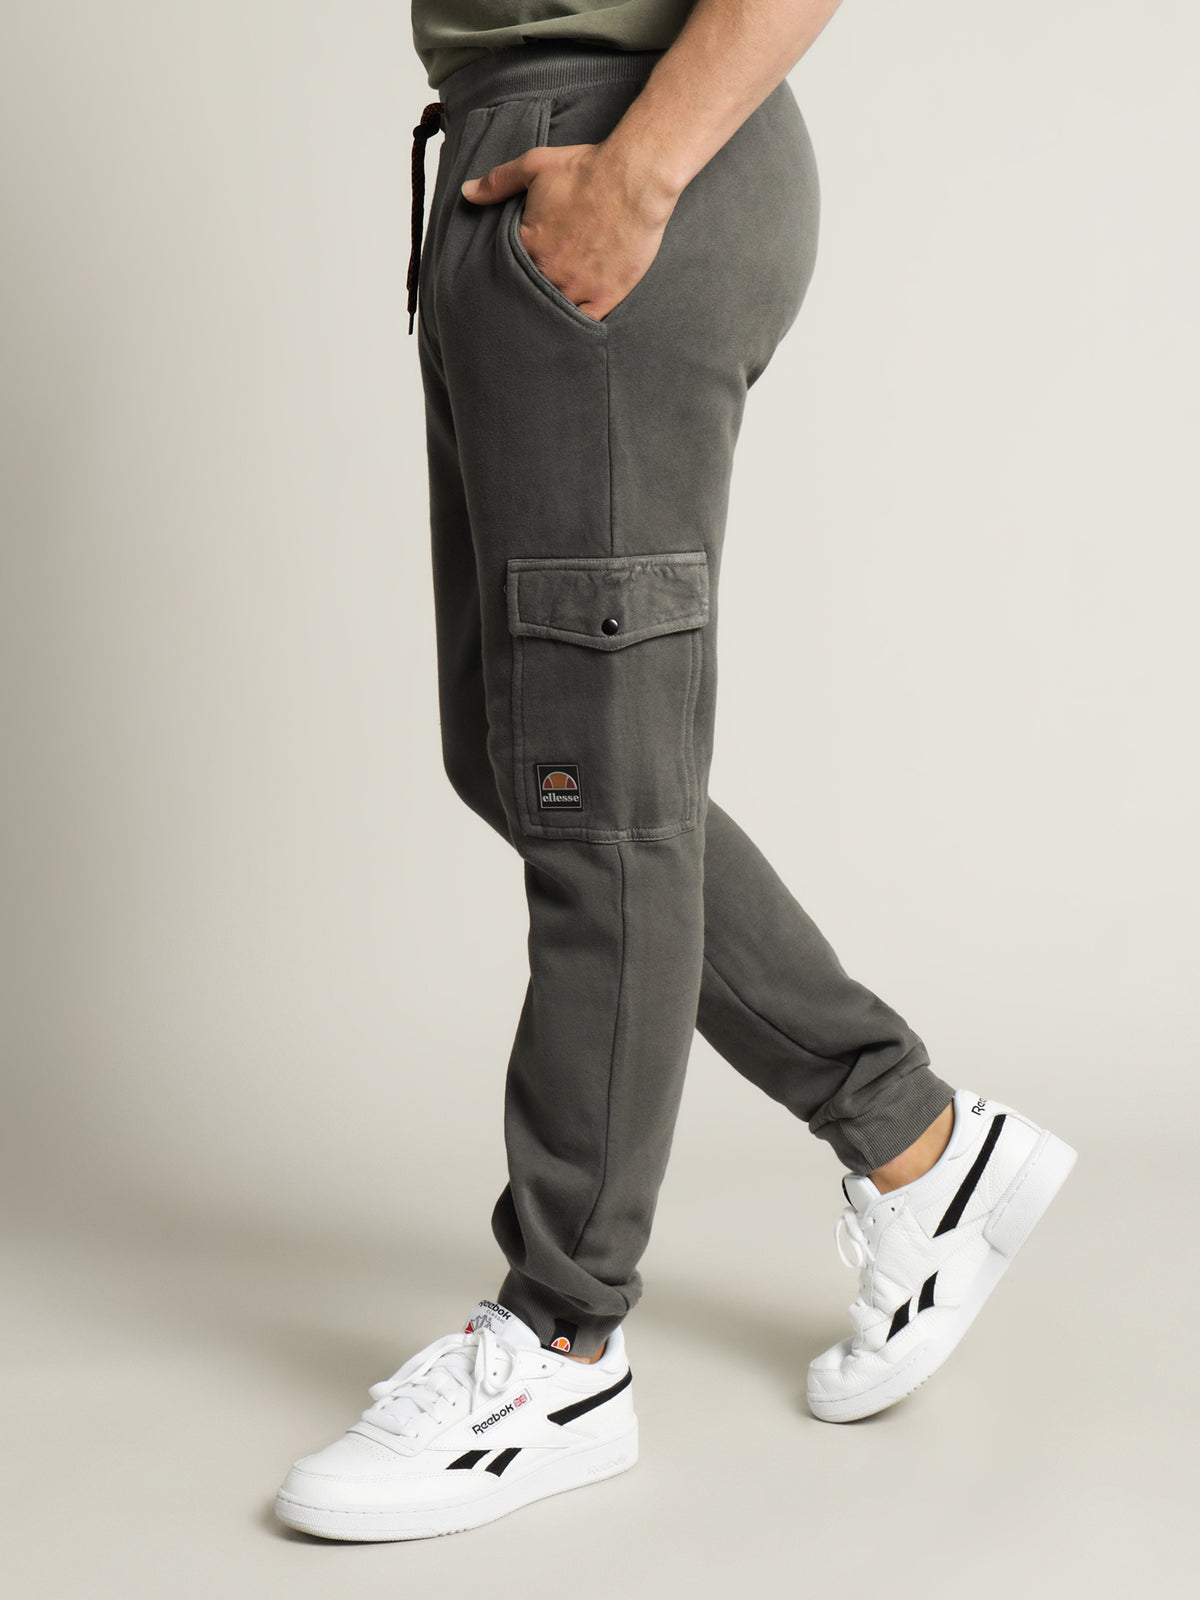 Feelix Track Pants in Washed Black